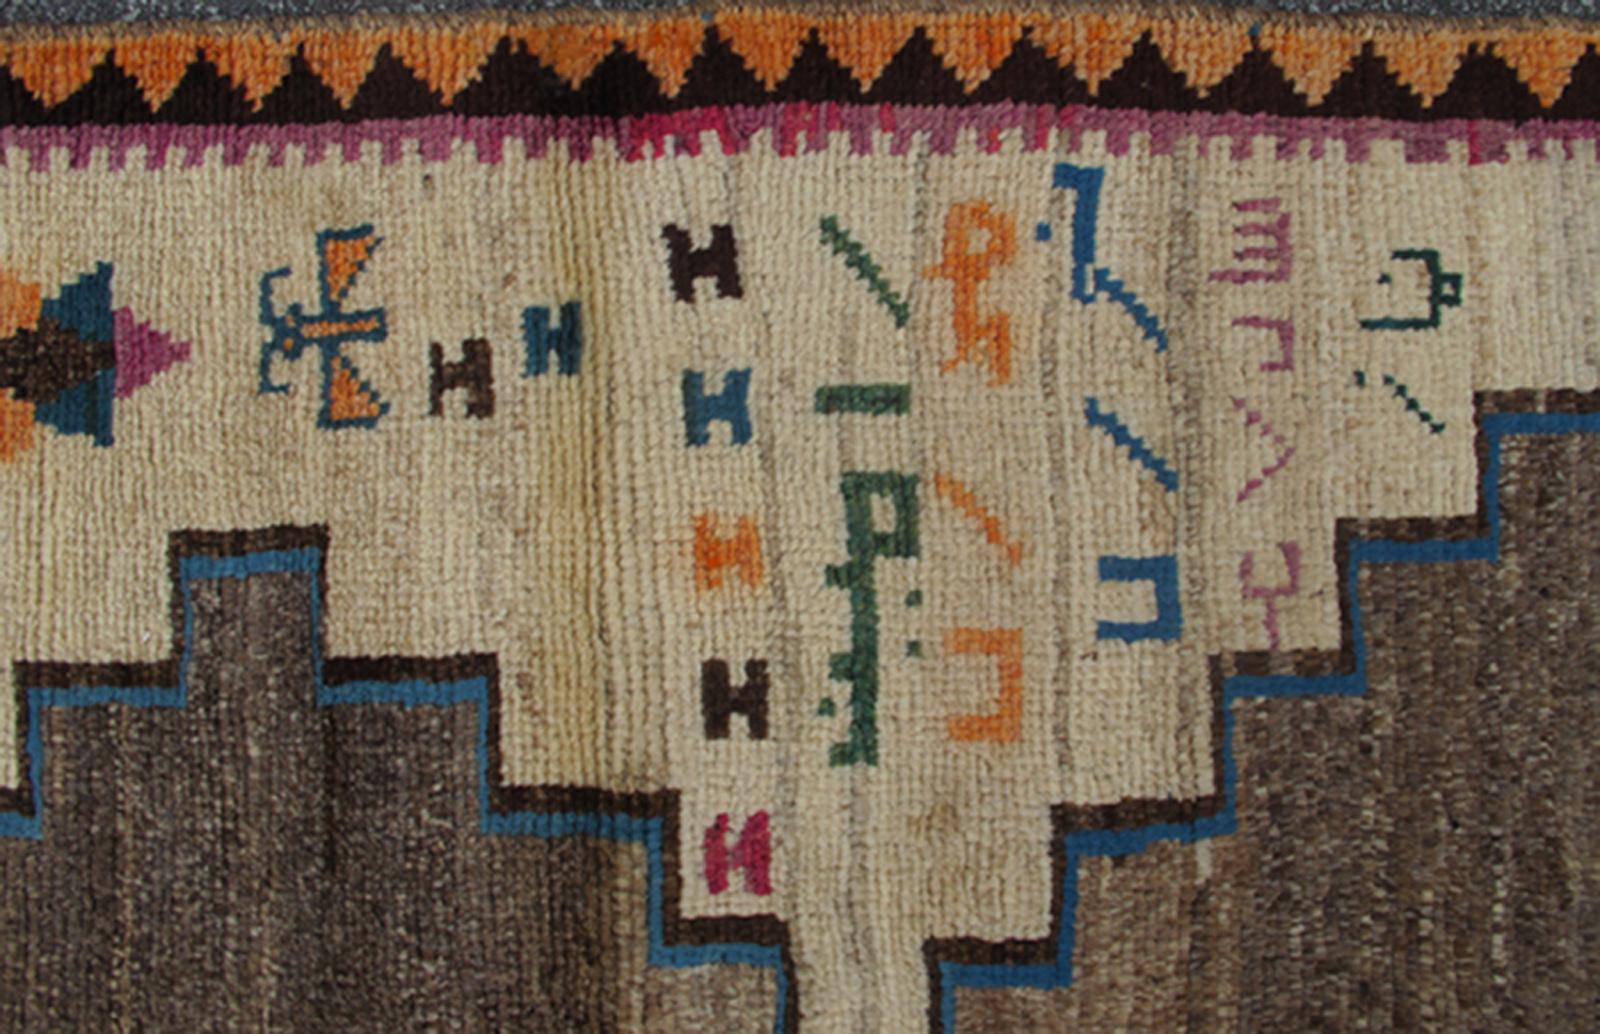 From Southern Persia, Gabbeh vintage rug with medallions in brown, cream, red, blue and green, rug H-1205-05, country of origin / type: Iran / Gabbeh, circa 1950

This high-pile mid-20th century vintage Persian Gabbeh carpet consists of large